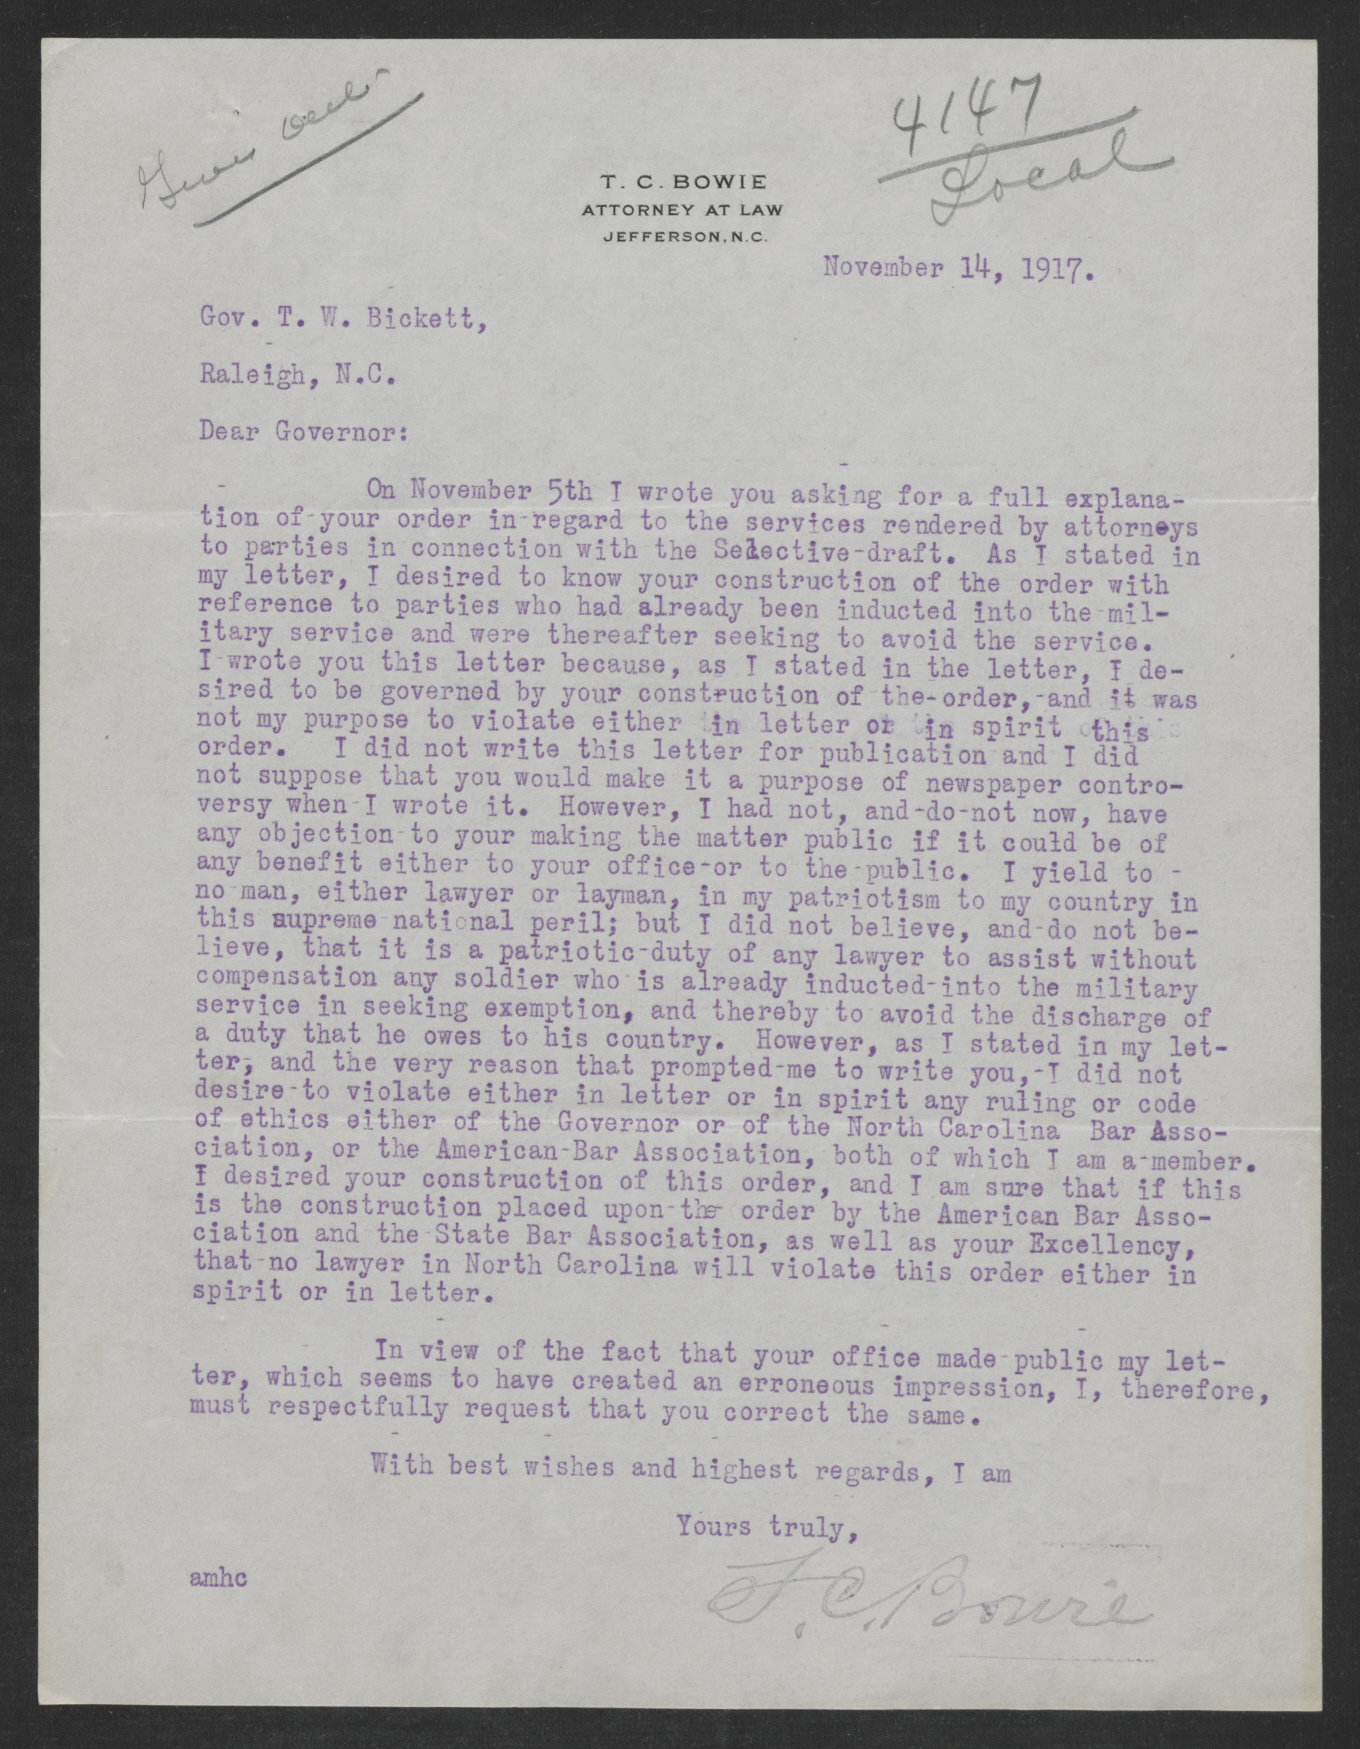 Letter from Thomas C. Bowie to Thomas W. Bickett, November 14, 1917